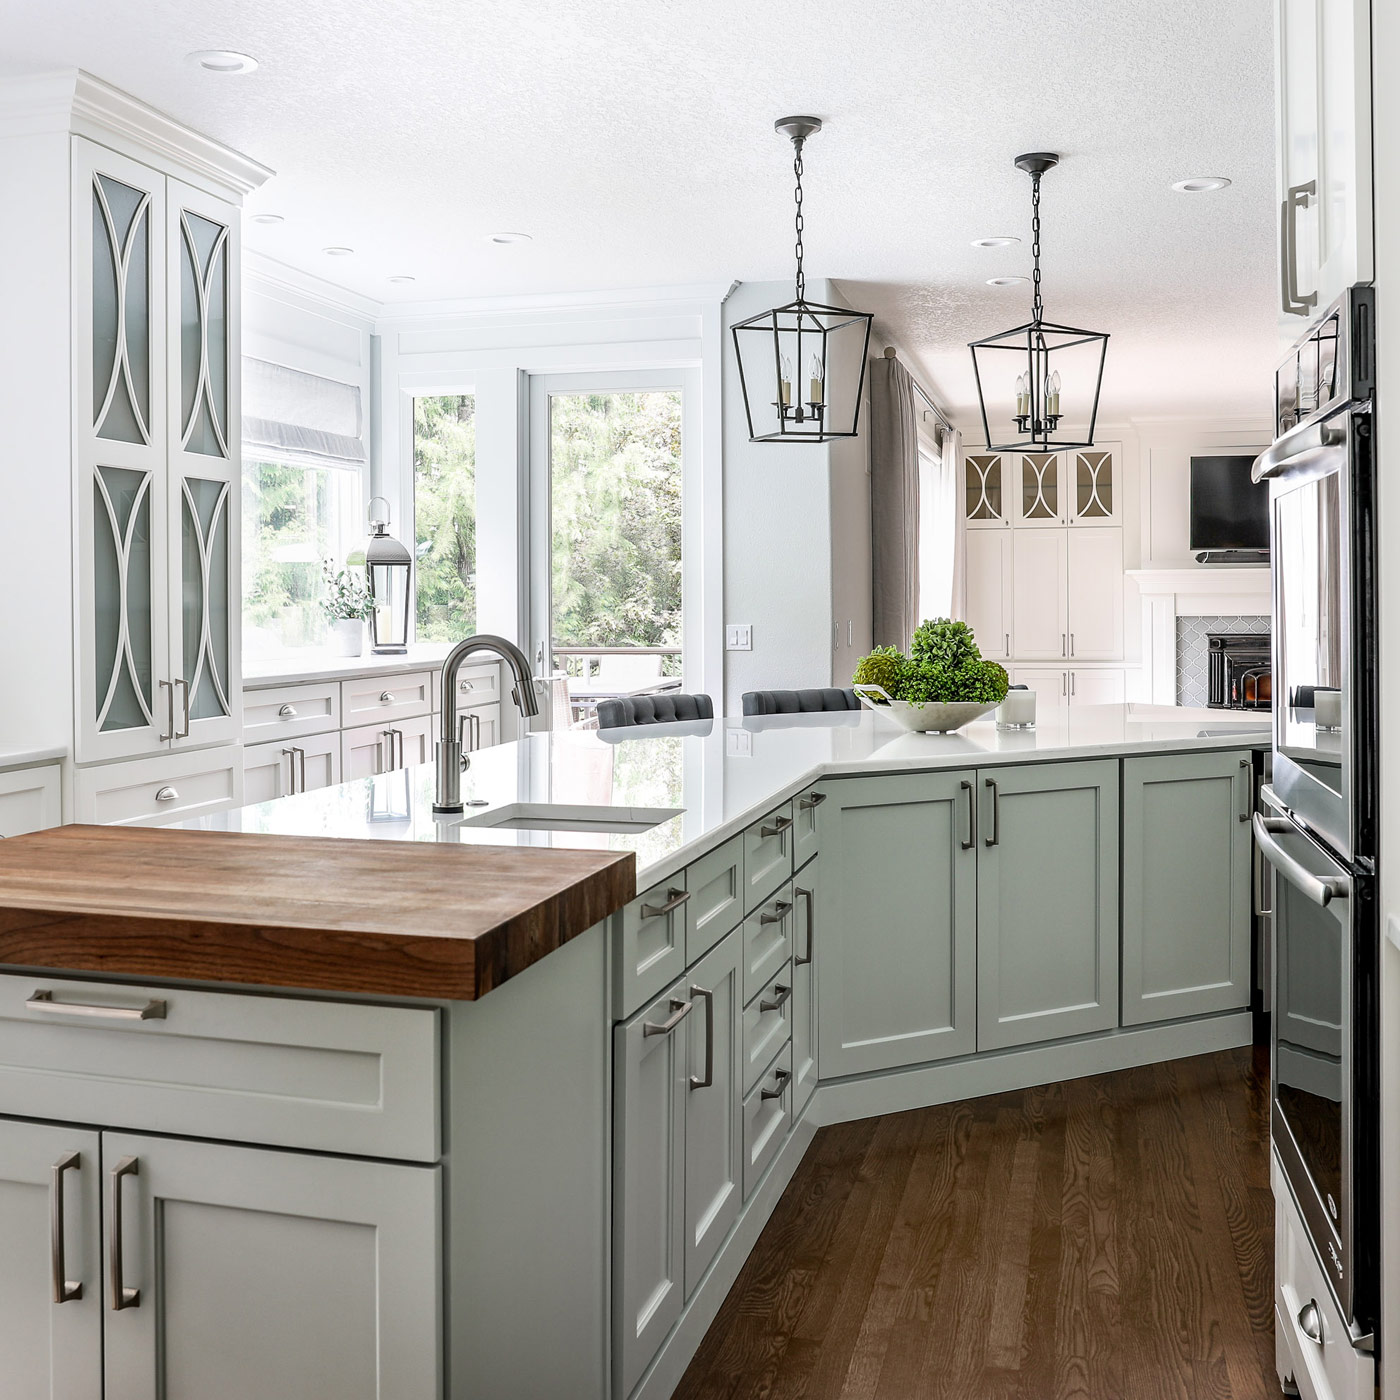 French Country Kitchen Remodel - Wendy O'Brien Interior Planning & Design